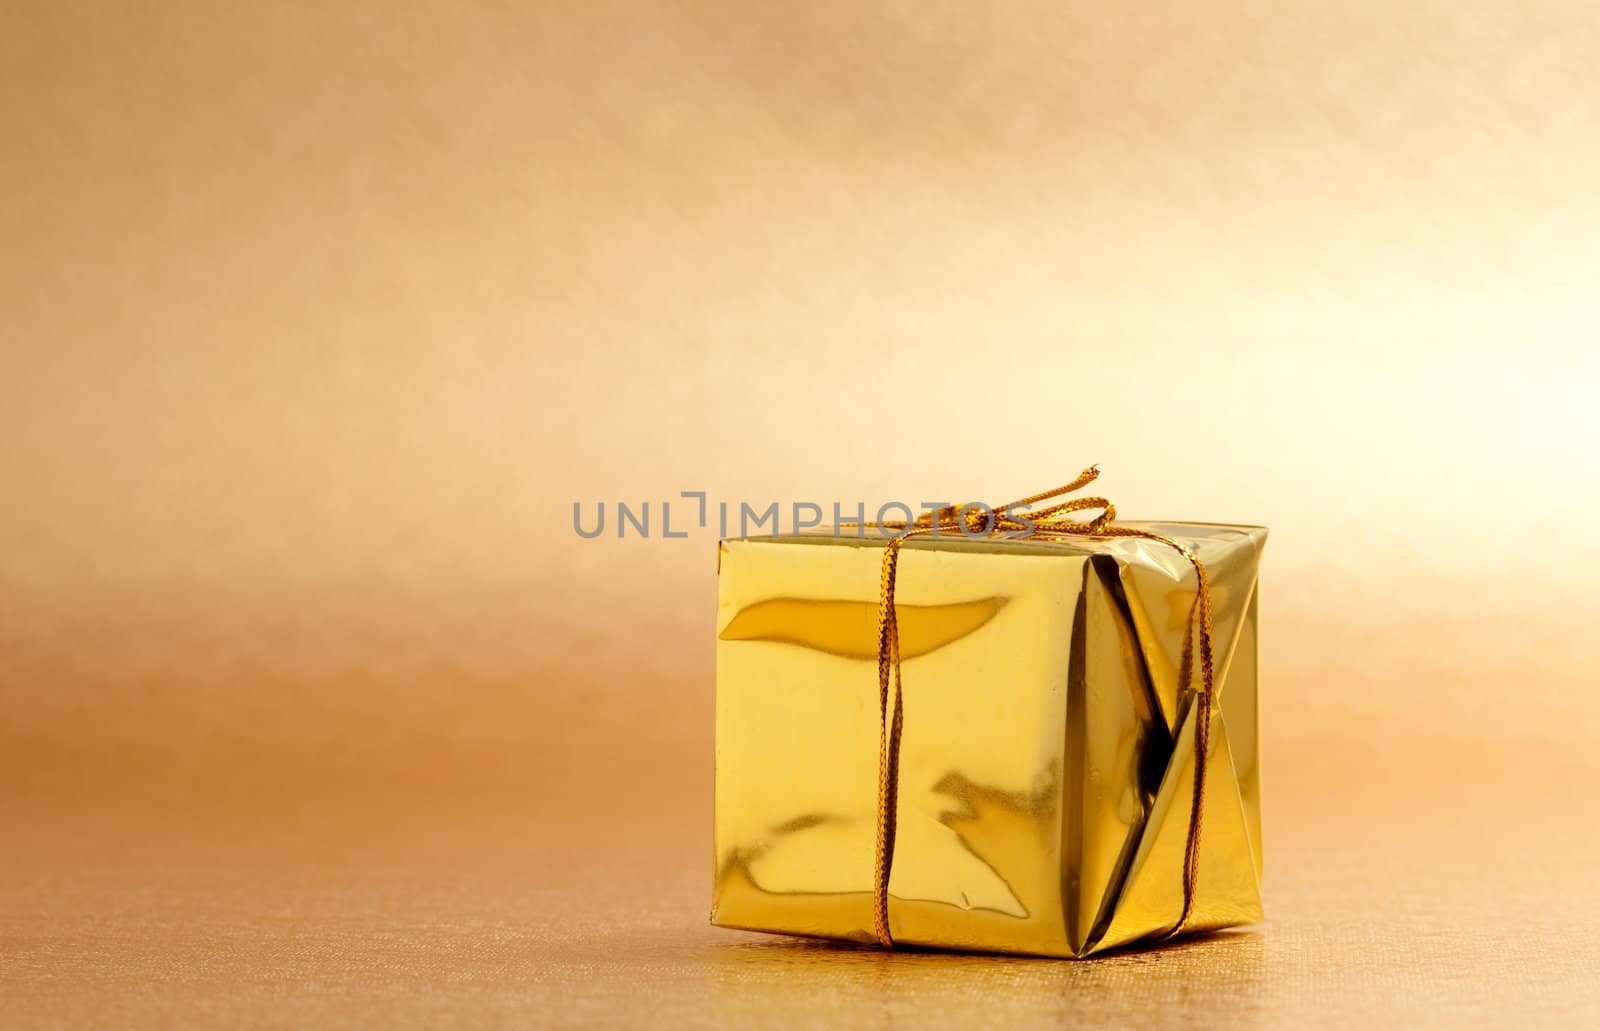 Beautiful gold gift box with gold background